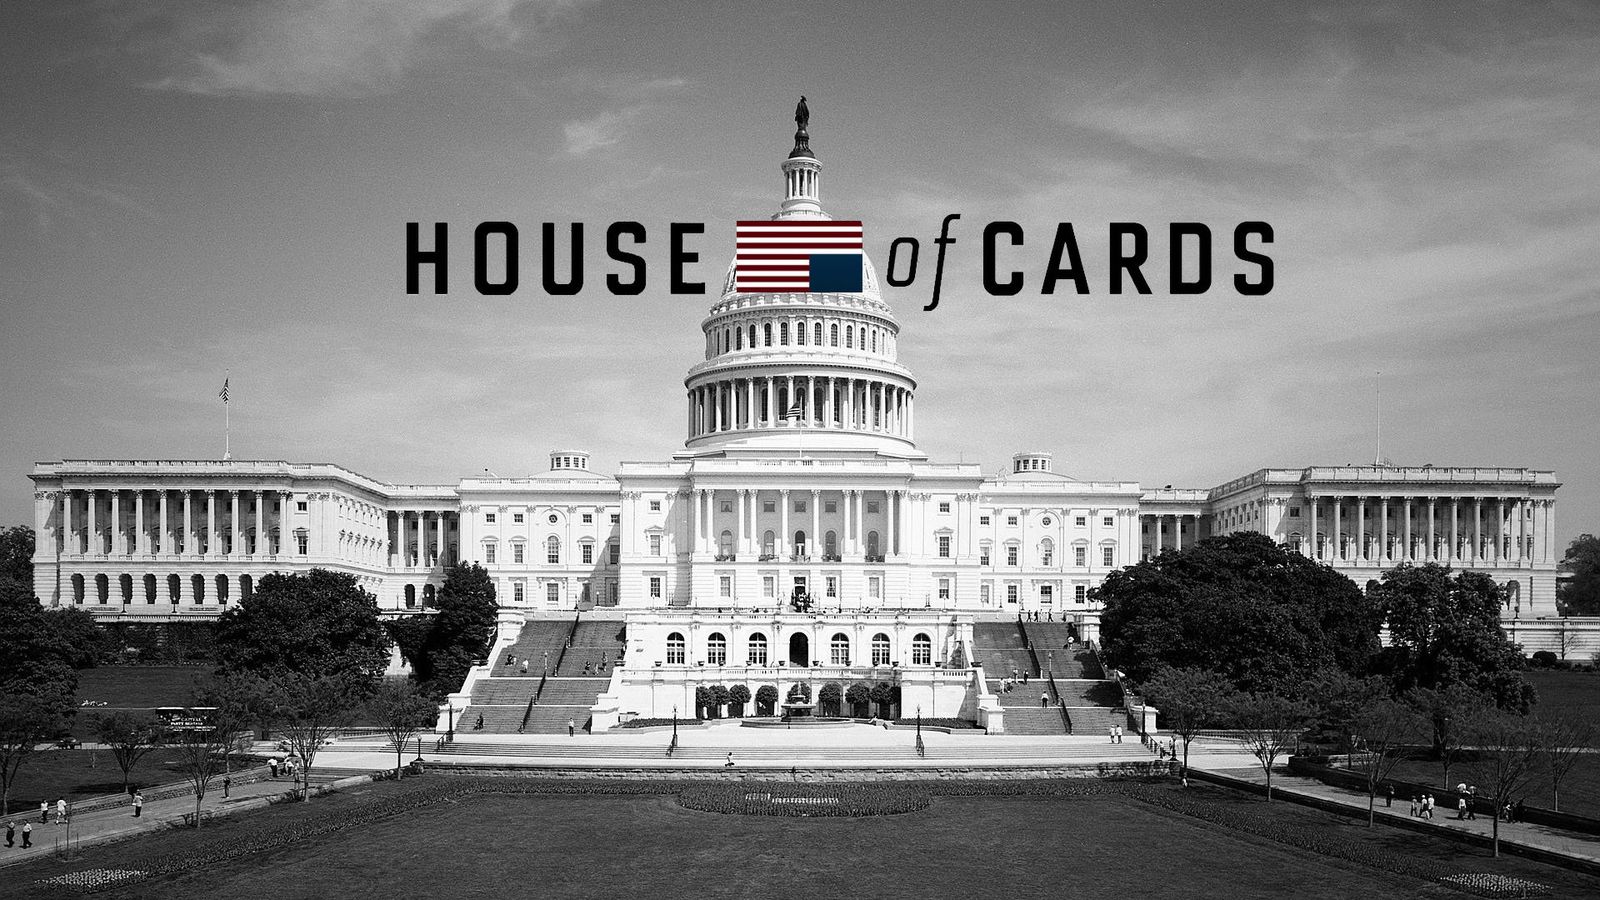 house of cards wallpaper,landmark,architecture,building,black and white,government